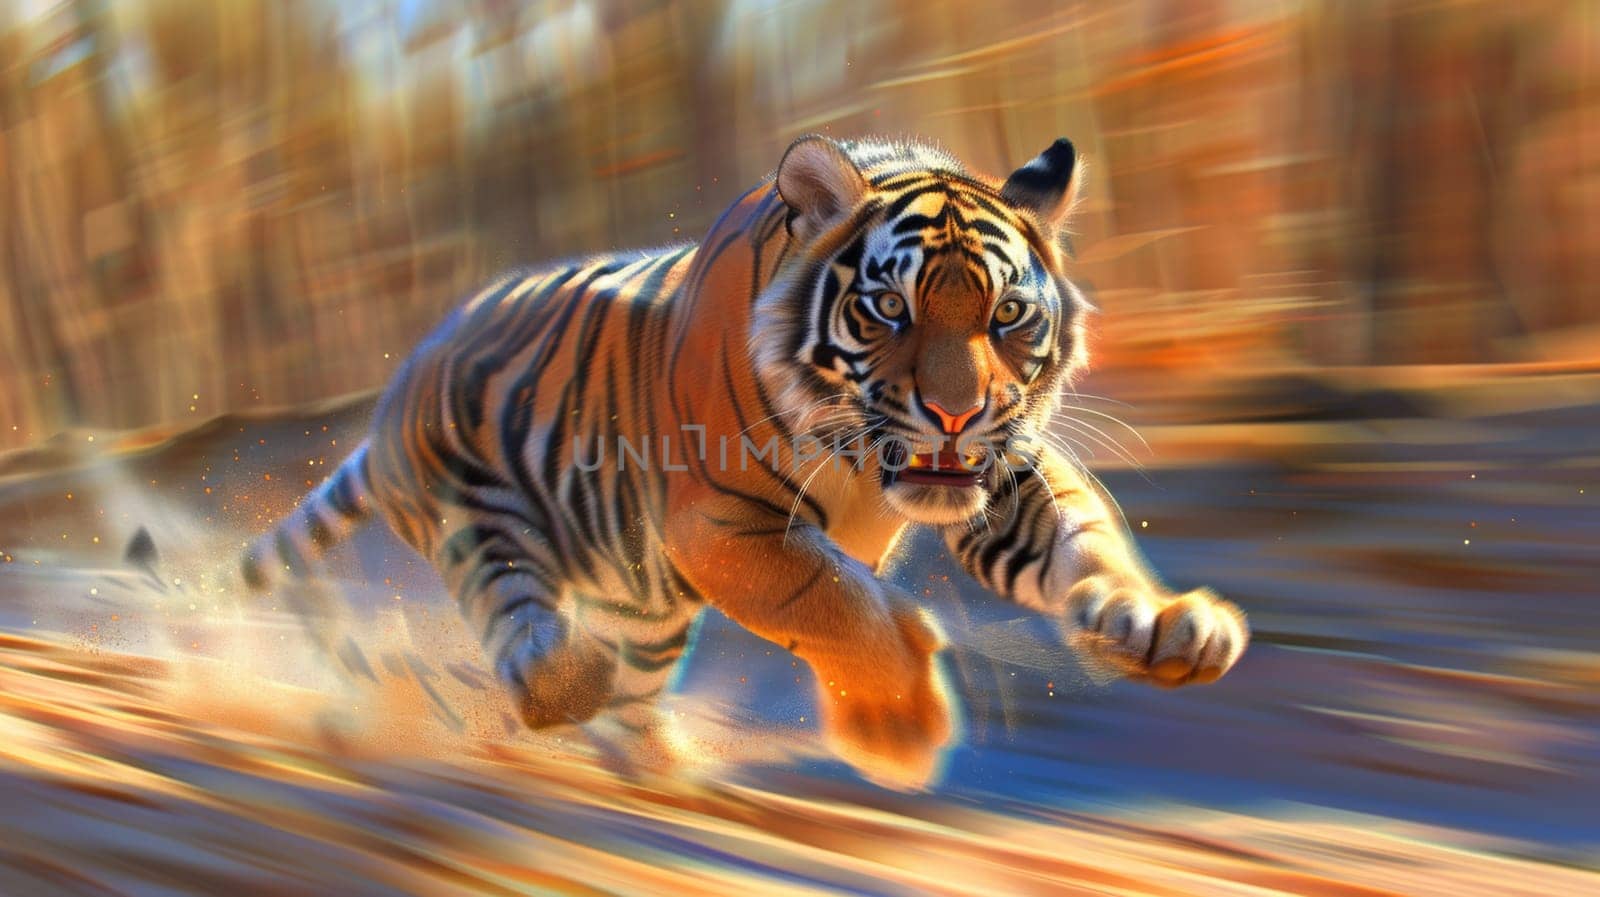 A tiger running on a dirt road in an artistic painting, AI by starush